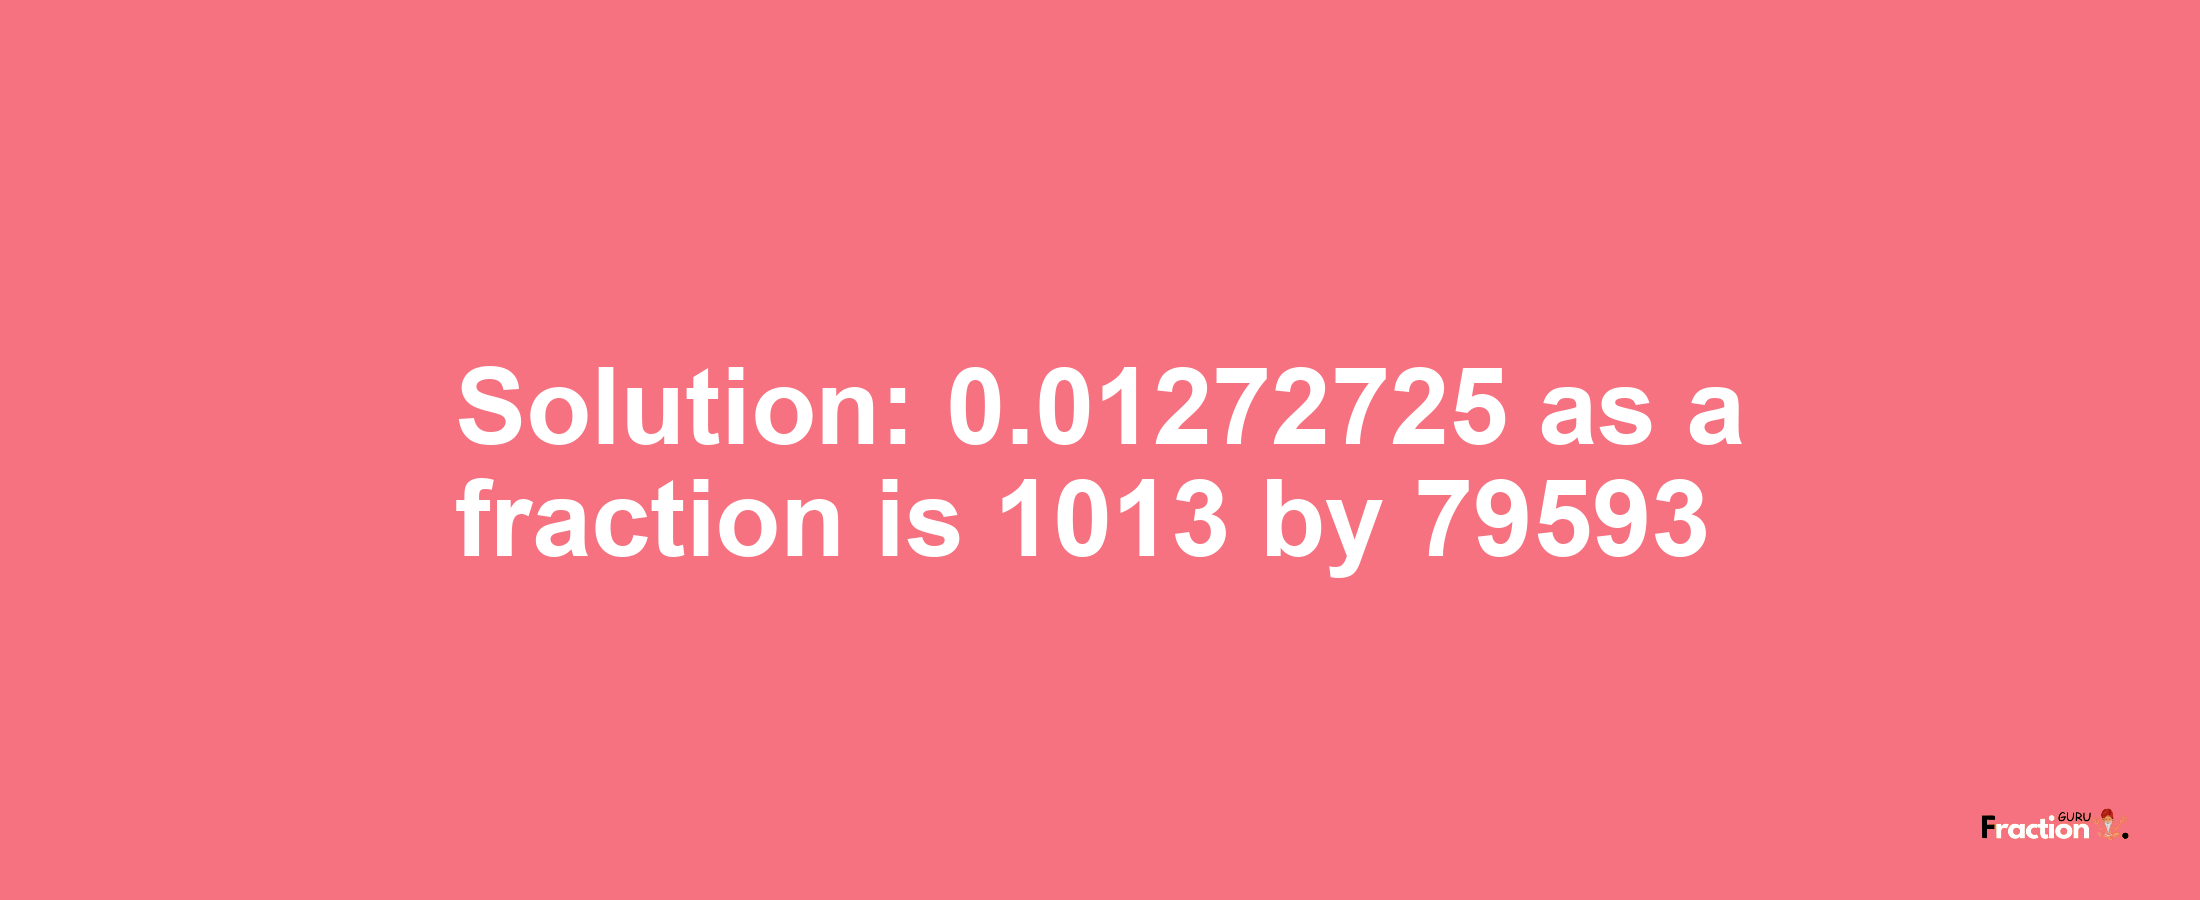 Solution:0.01272725 as a fraction is 1013/79593